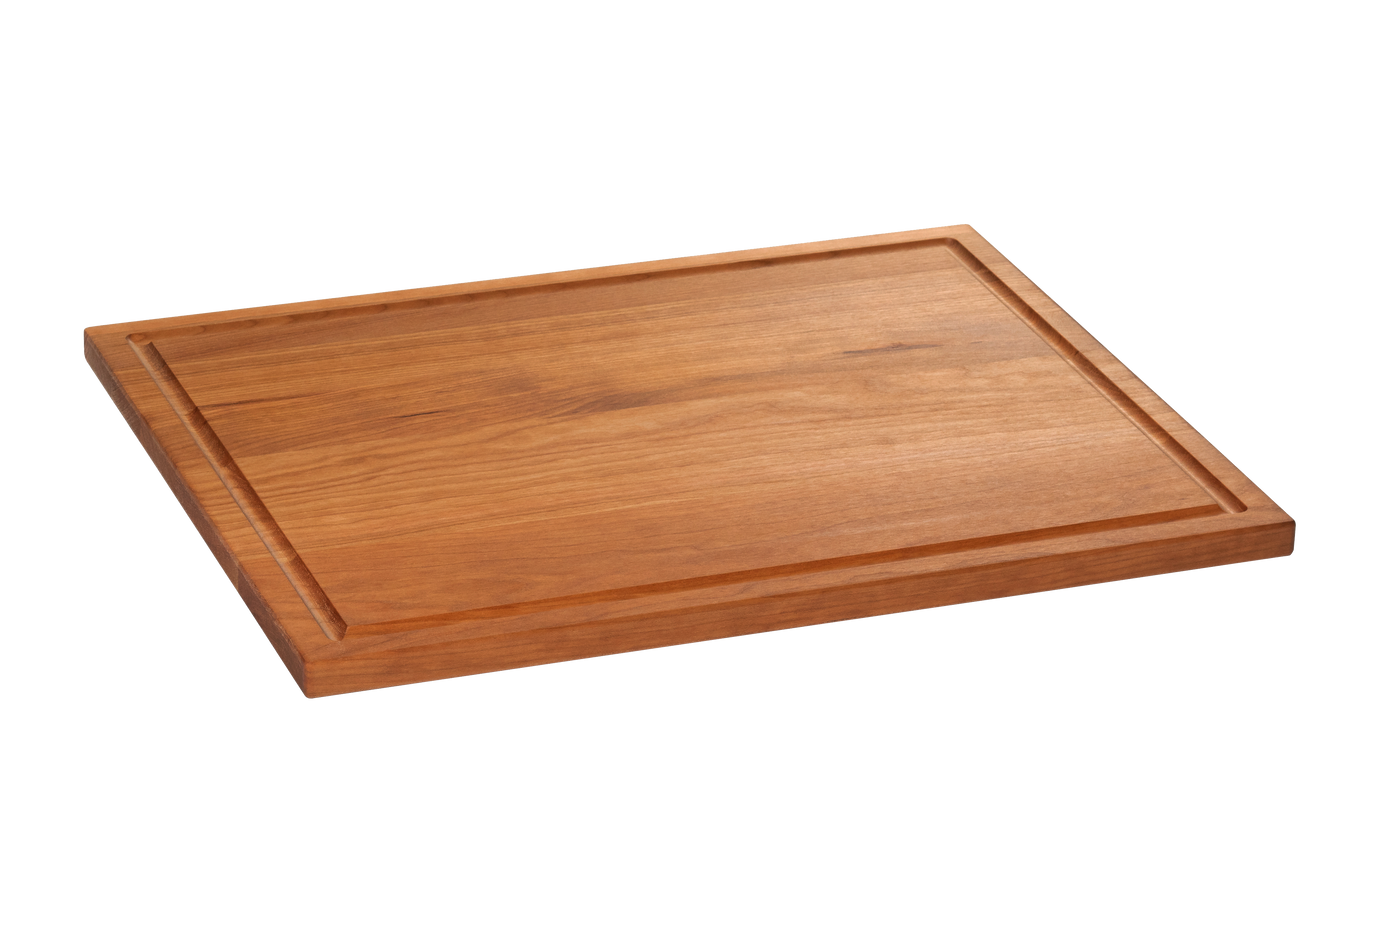 Cutting Board with Juice Groove (19" length)